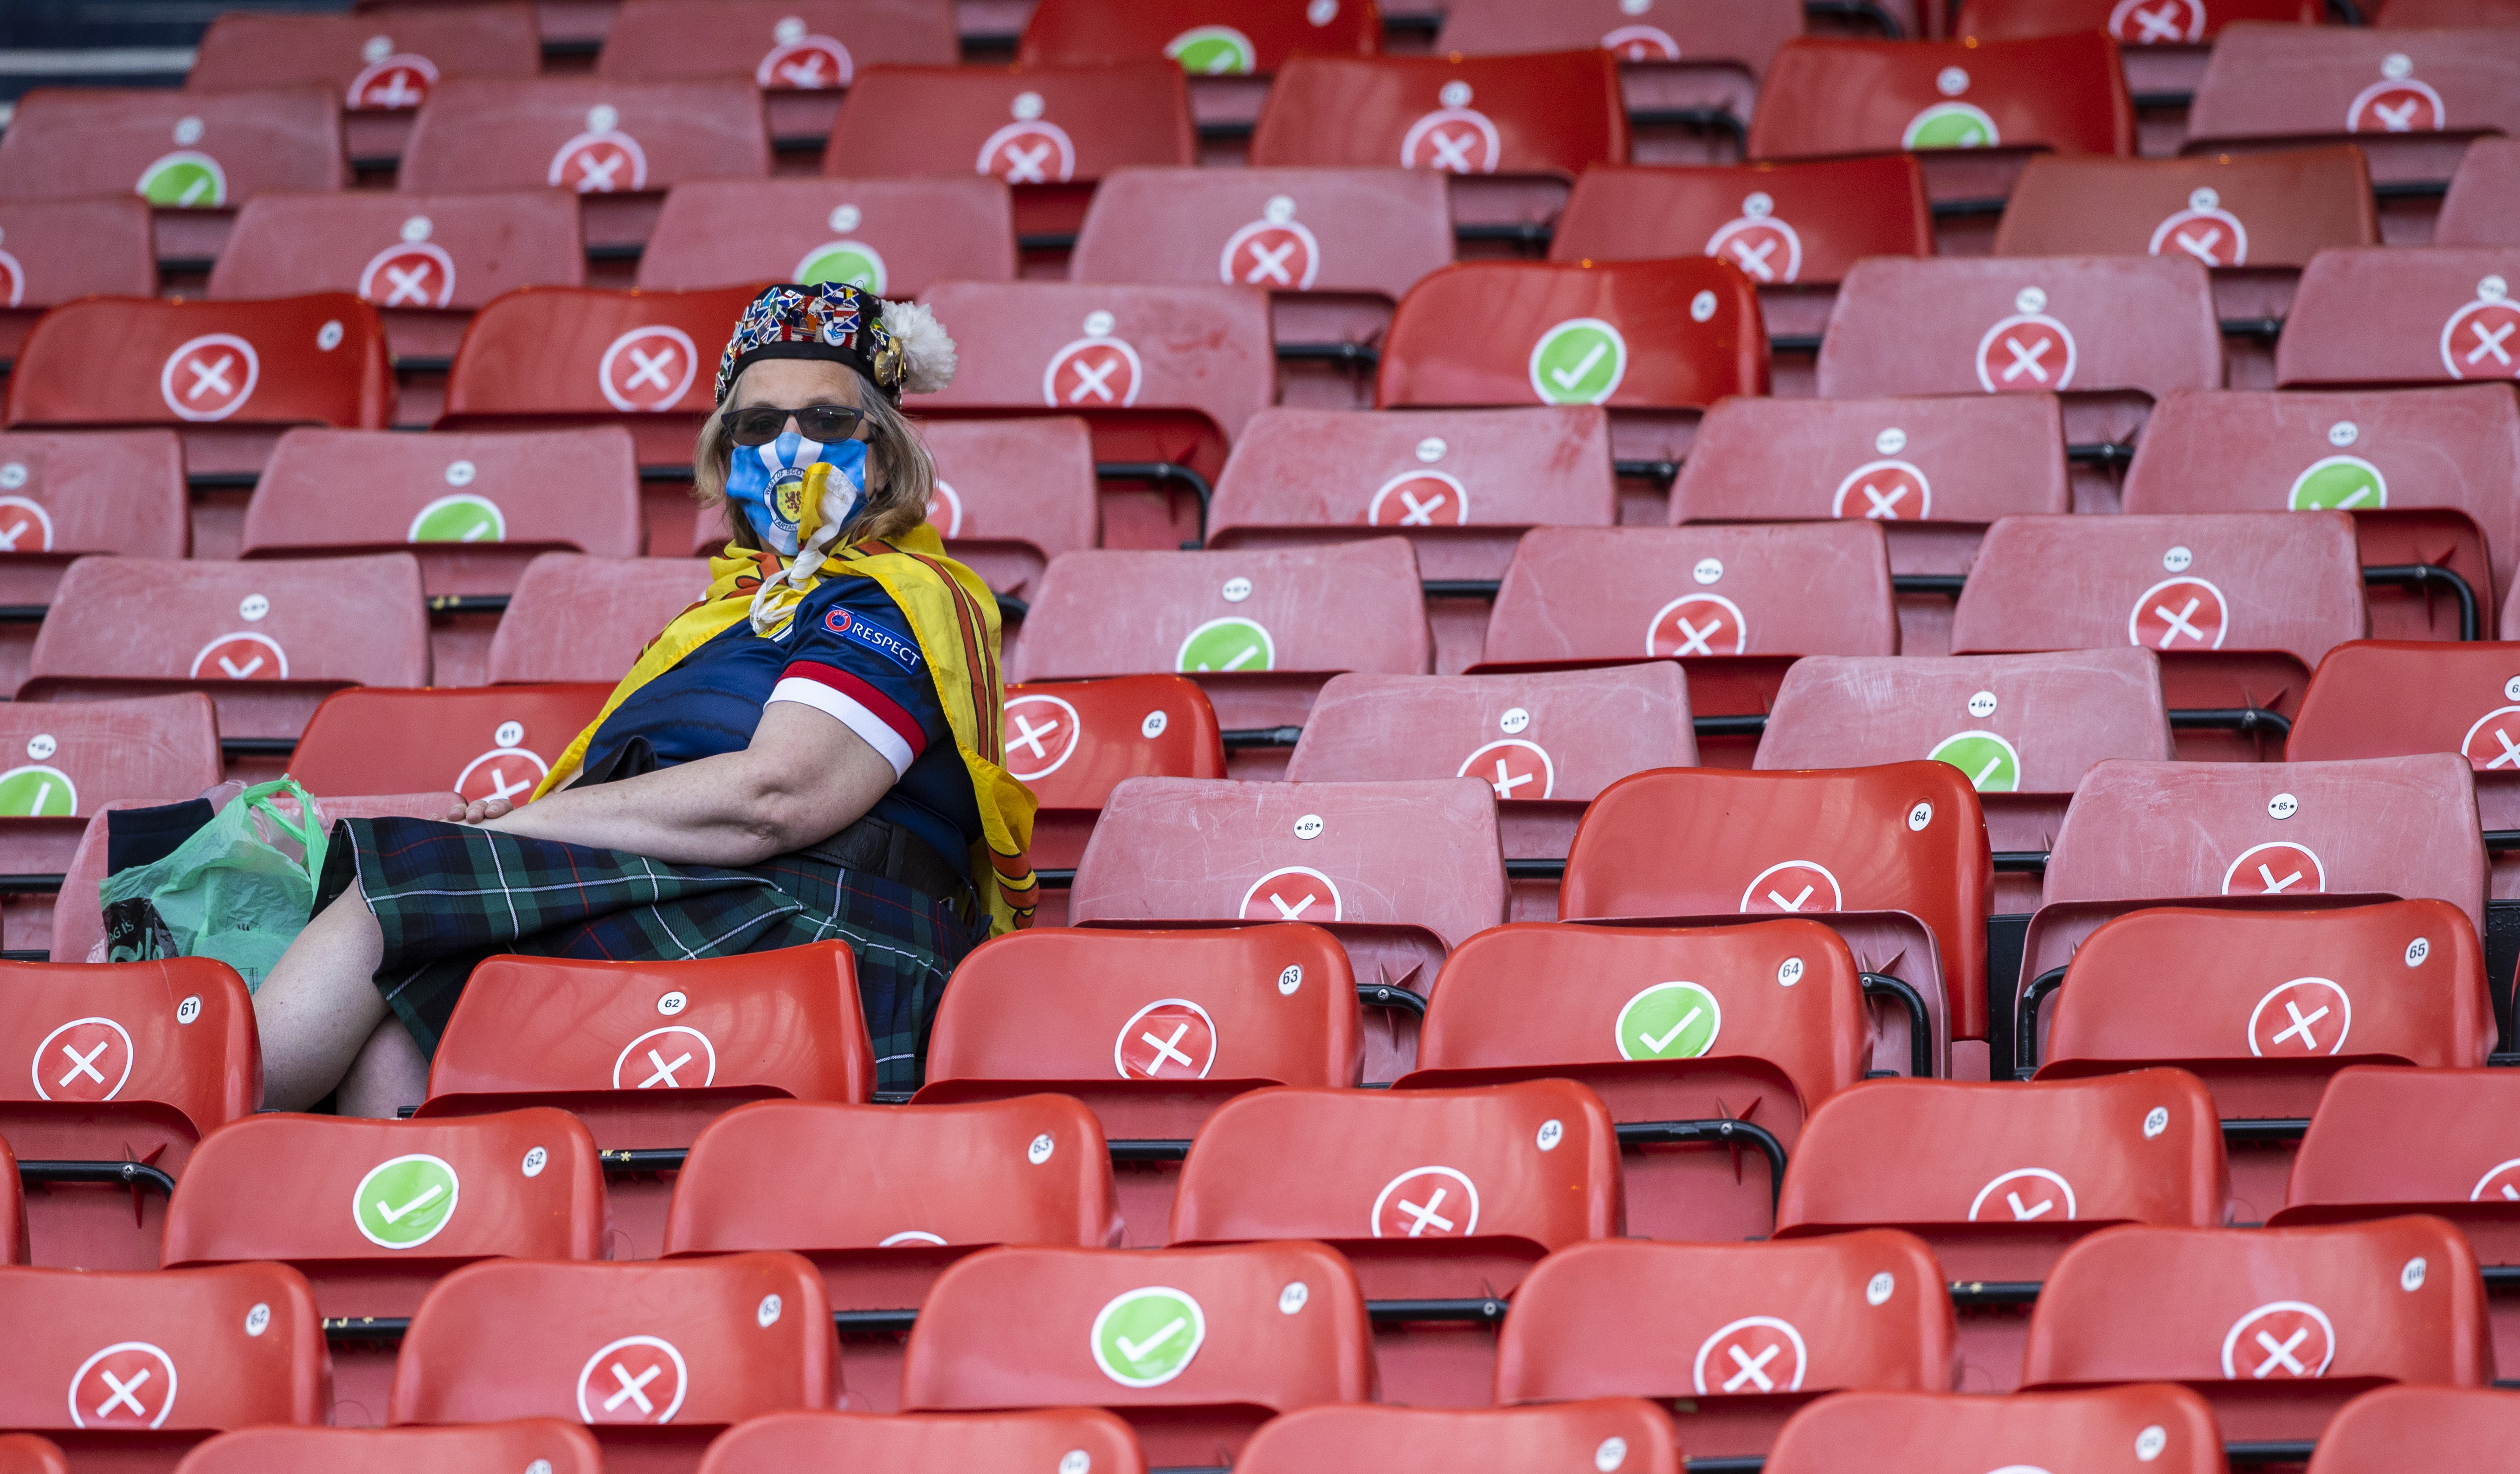 This Scotland supporter was soaking up the atmosphere nice and early.